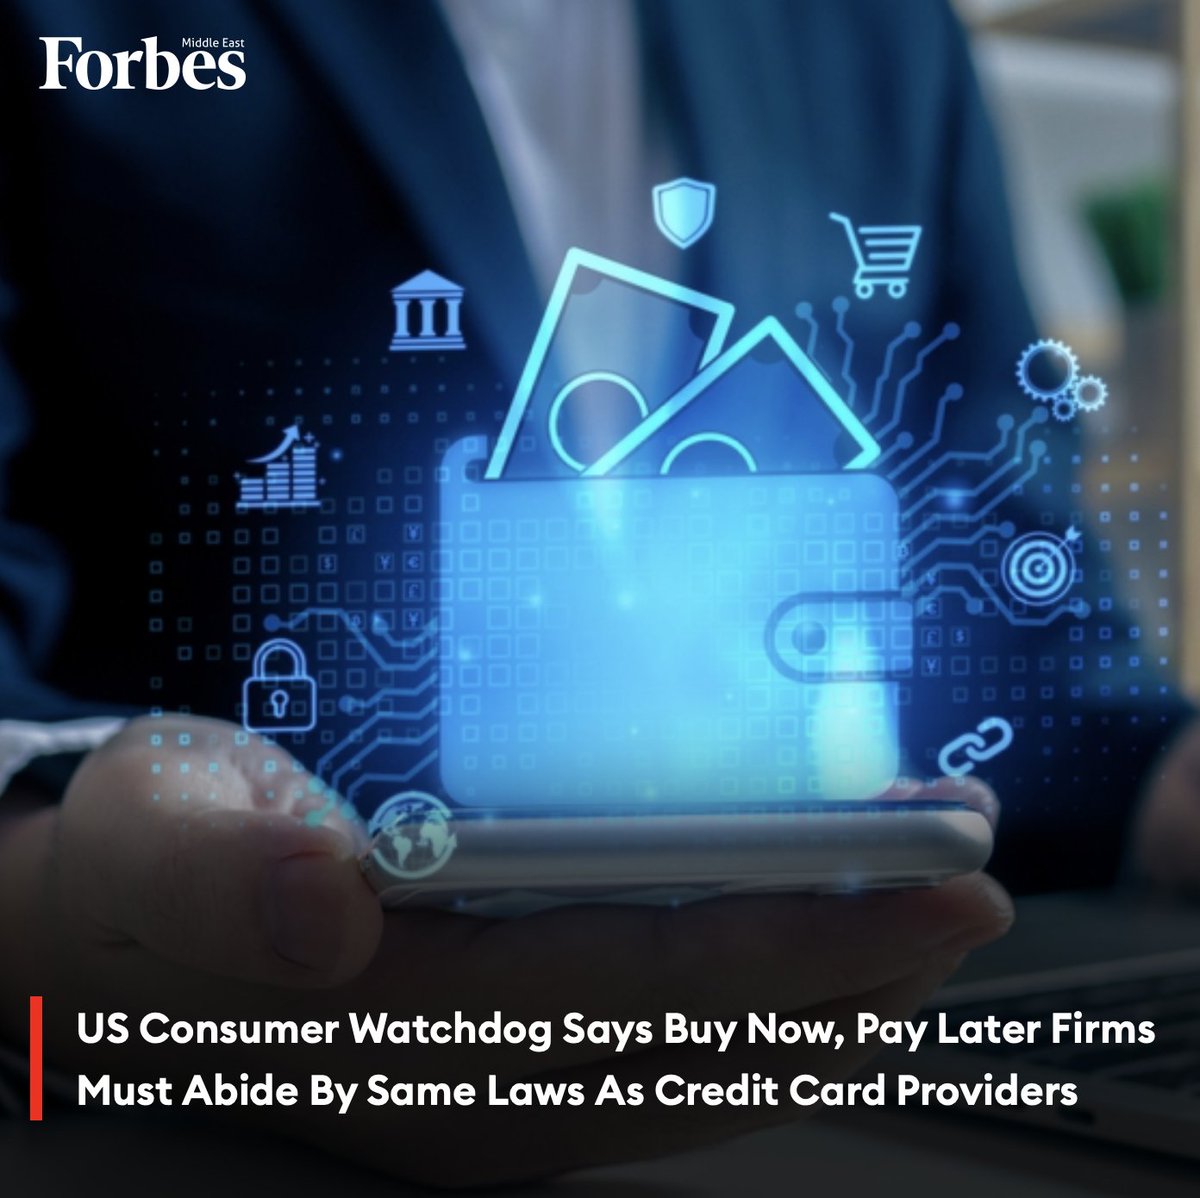 The #US consumer watchdog said that buy now, pay later firms will now have to abide by the same rules that apply to traditional credit card providers amid increased scrutiny on the rapidly expanding sector. #Forbes For more details: 🔗 on.forbesmiddleeast.com/rdg8